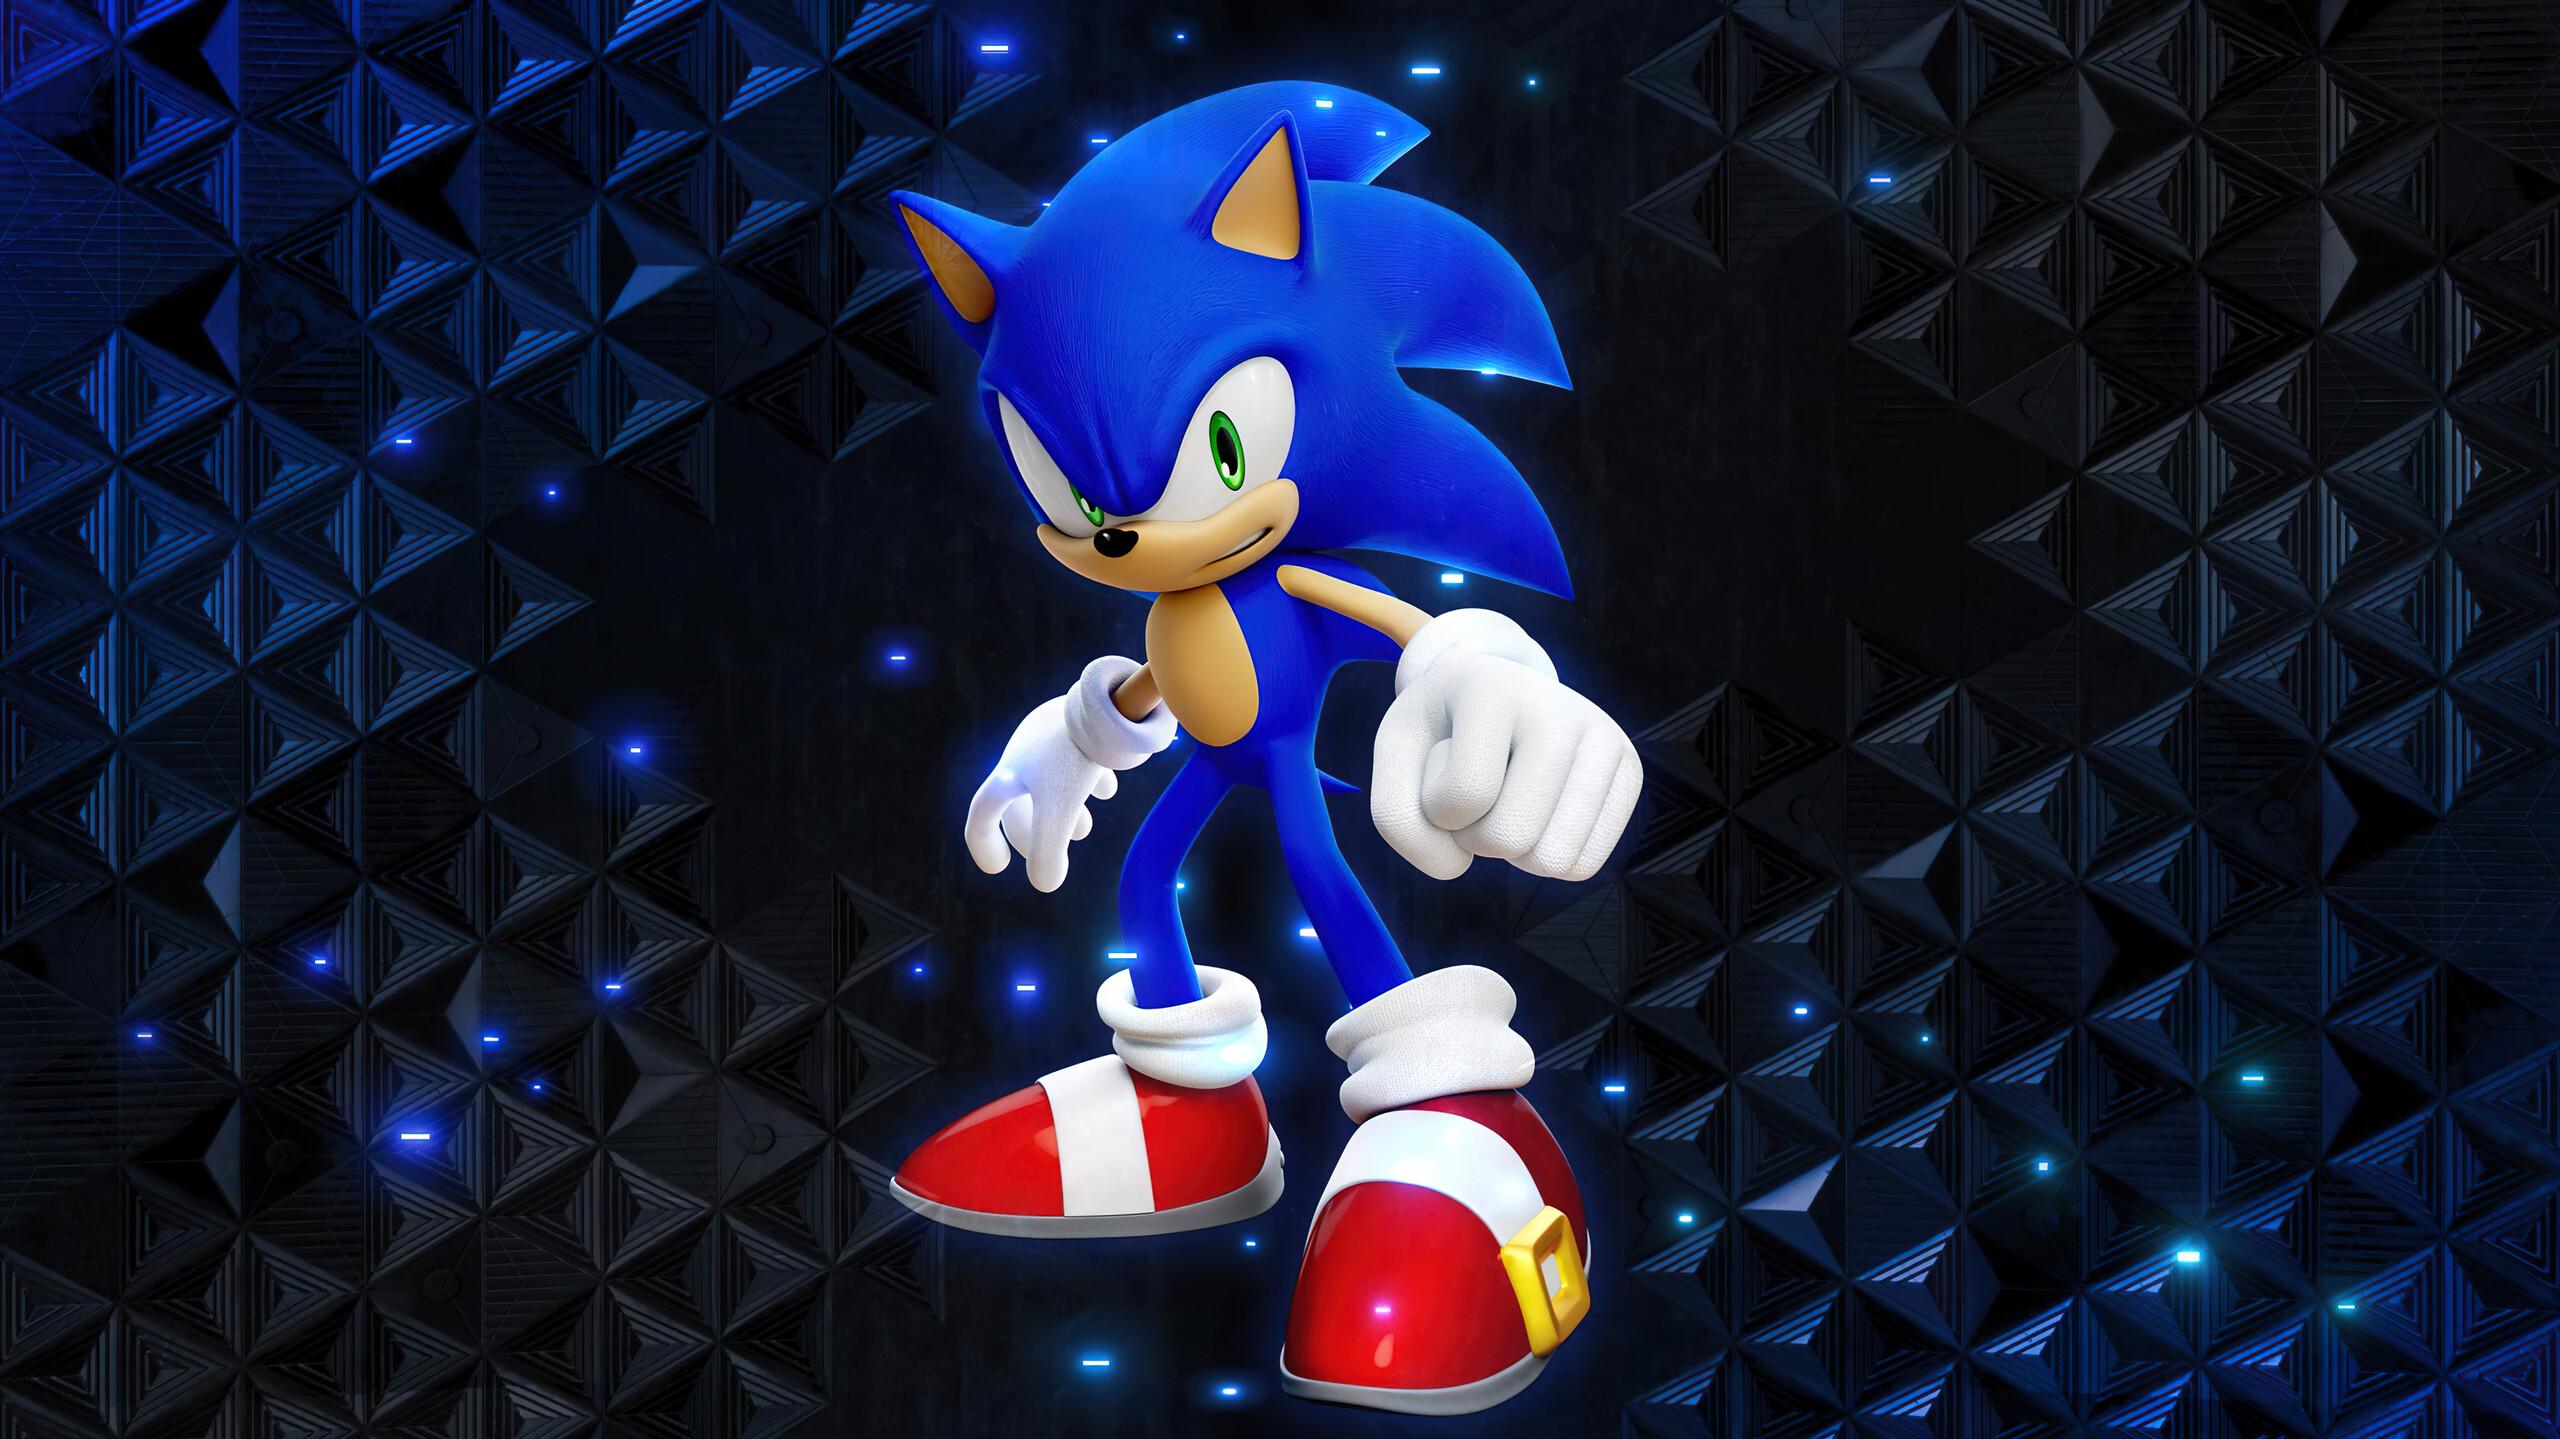 Sonic Frontiers Phone Wallpaper - Mobile Abyss